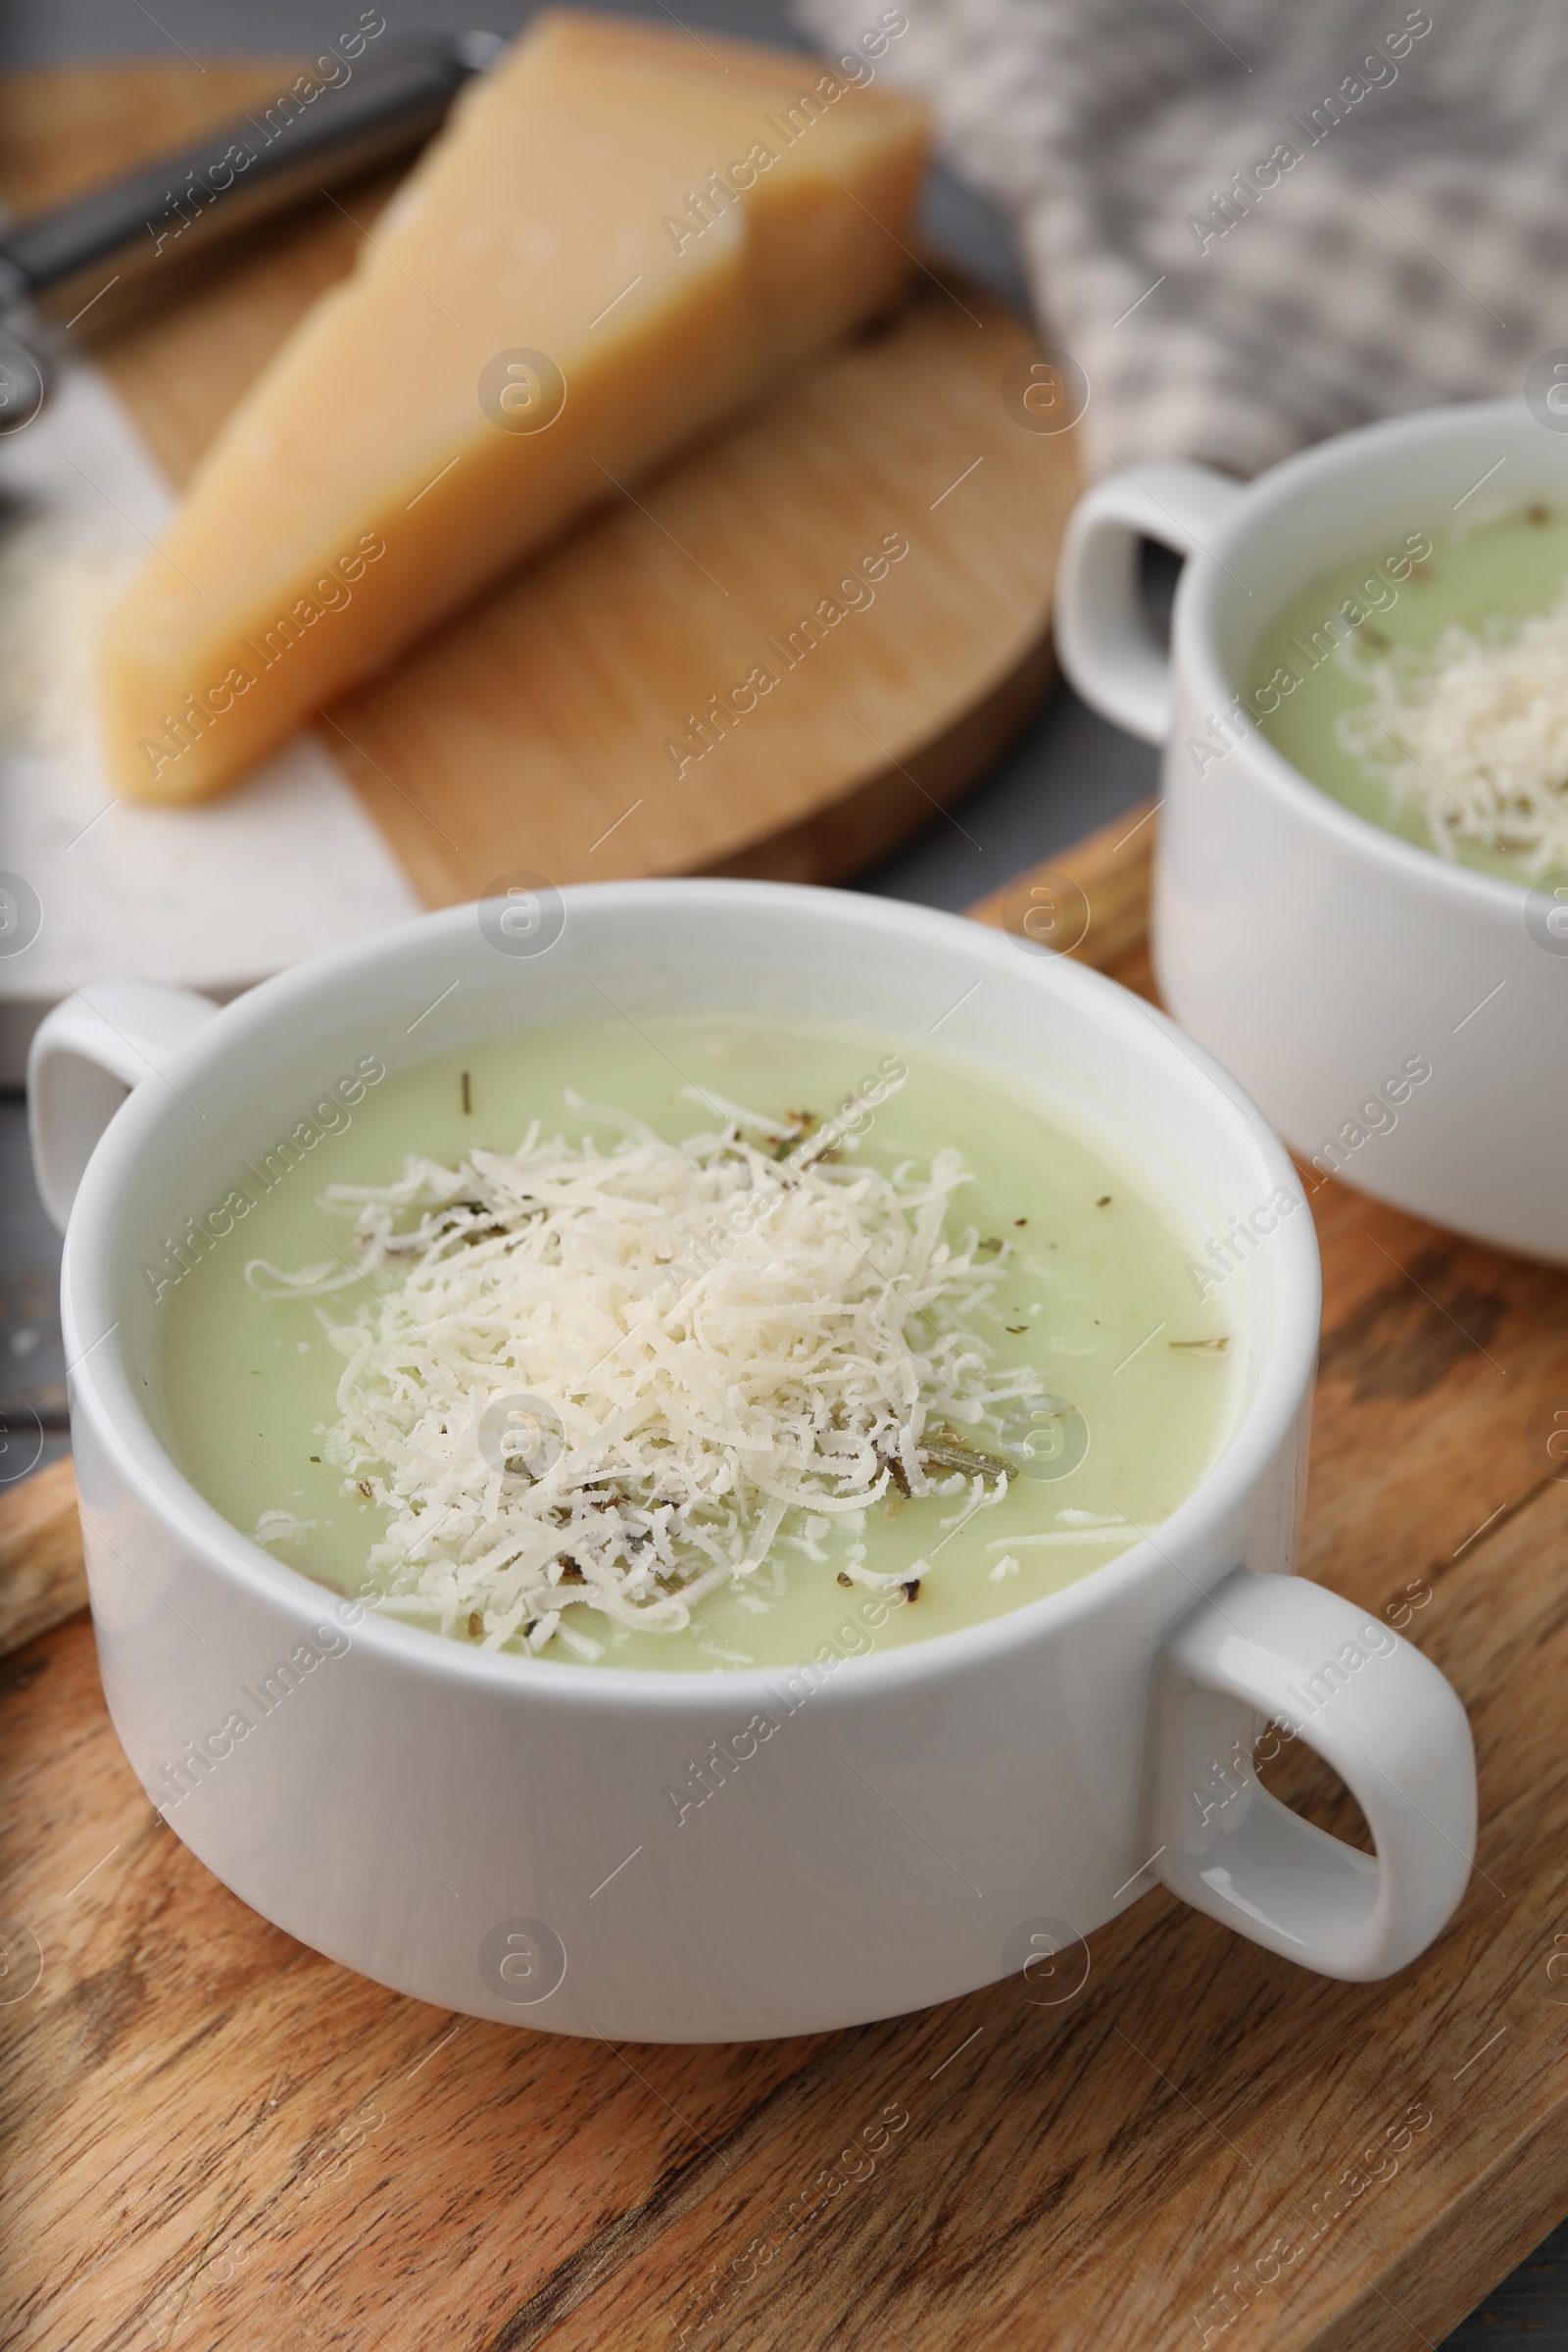 Photo of Delicious cream soup with parmesan cheese in bowls on table